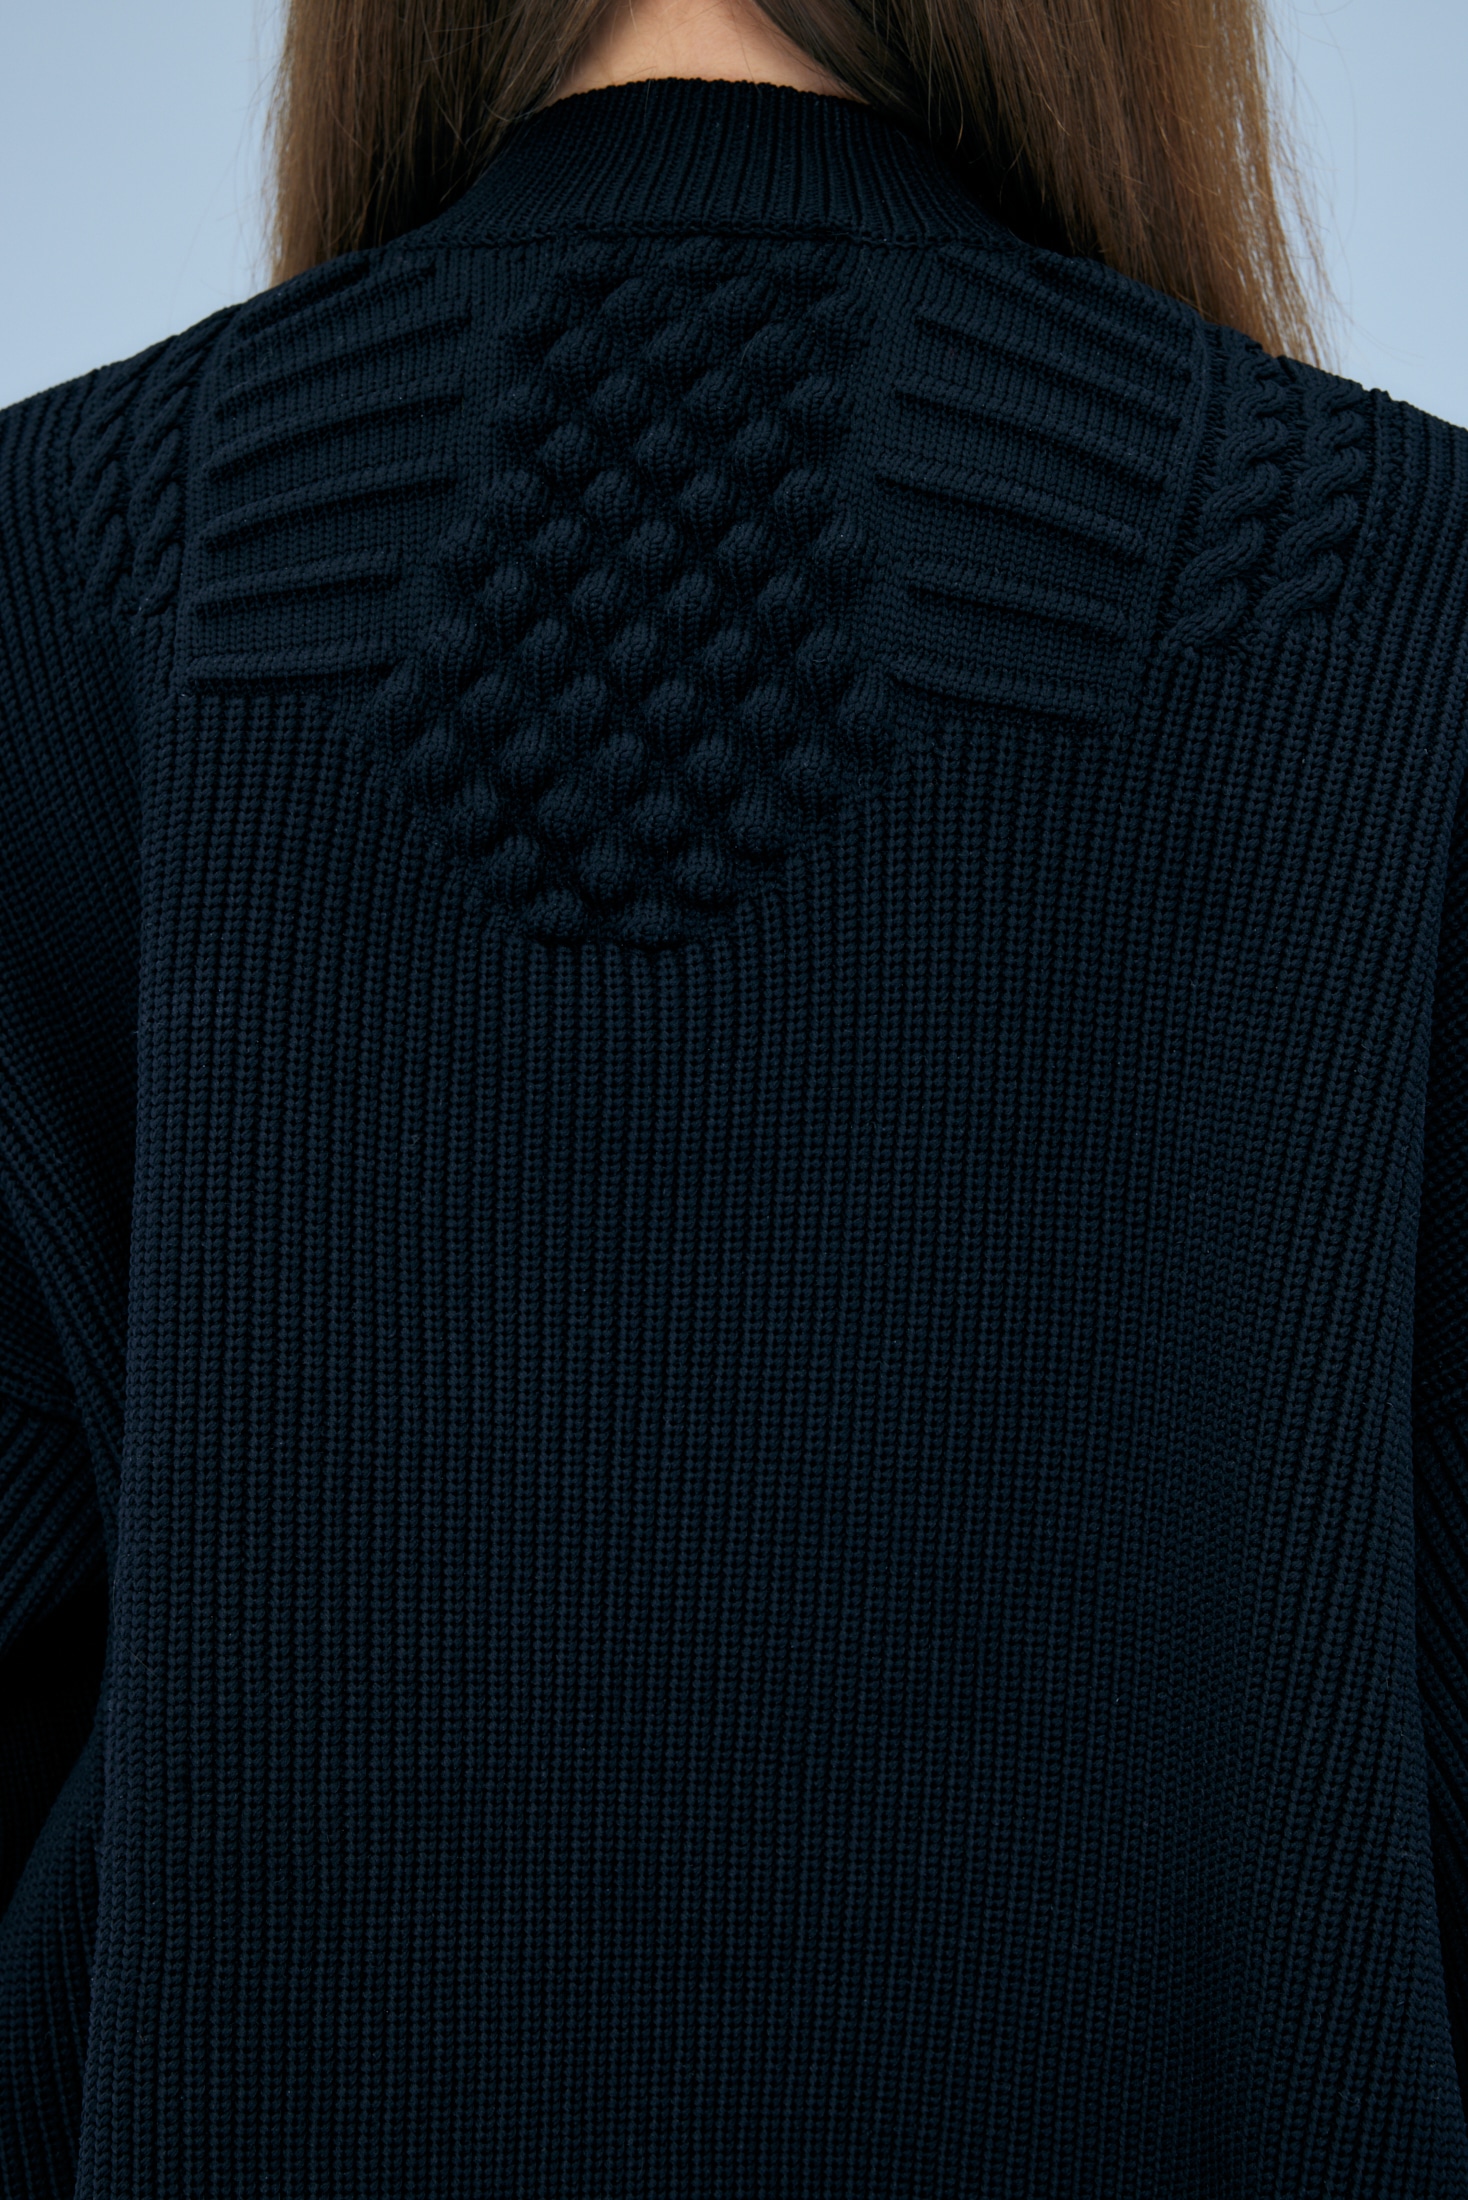 CURVE-ARM A-LINE PULLOVER